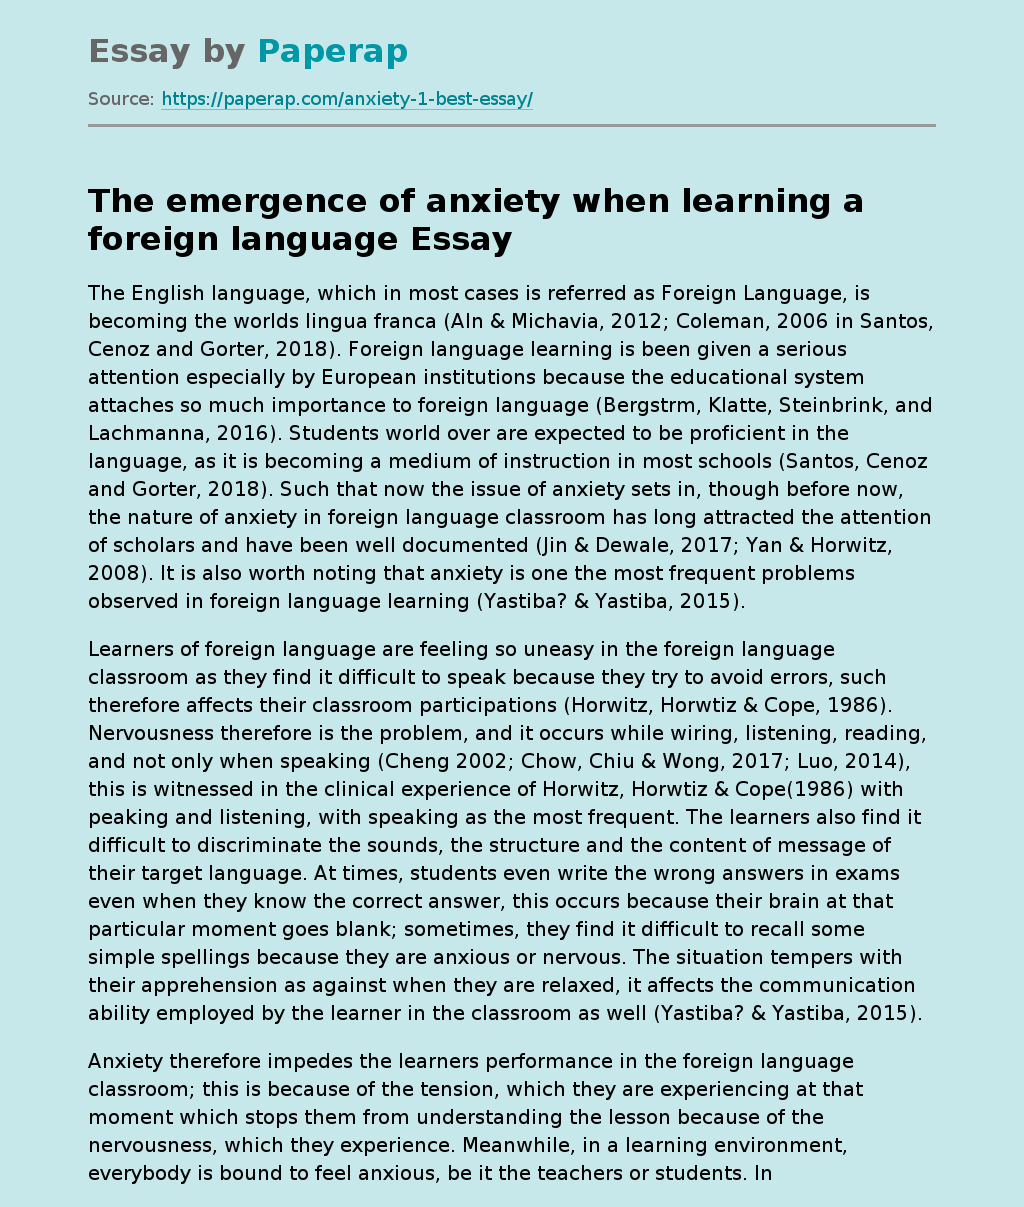 The emergence of anxiety when learning a foreign language